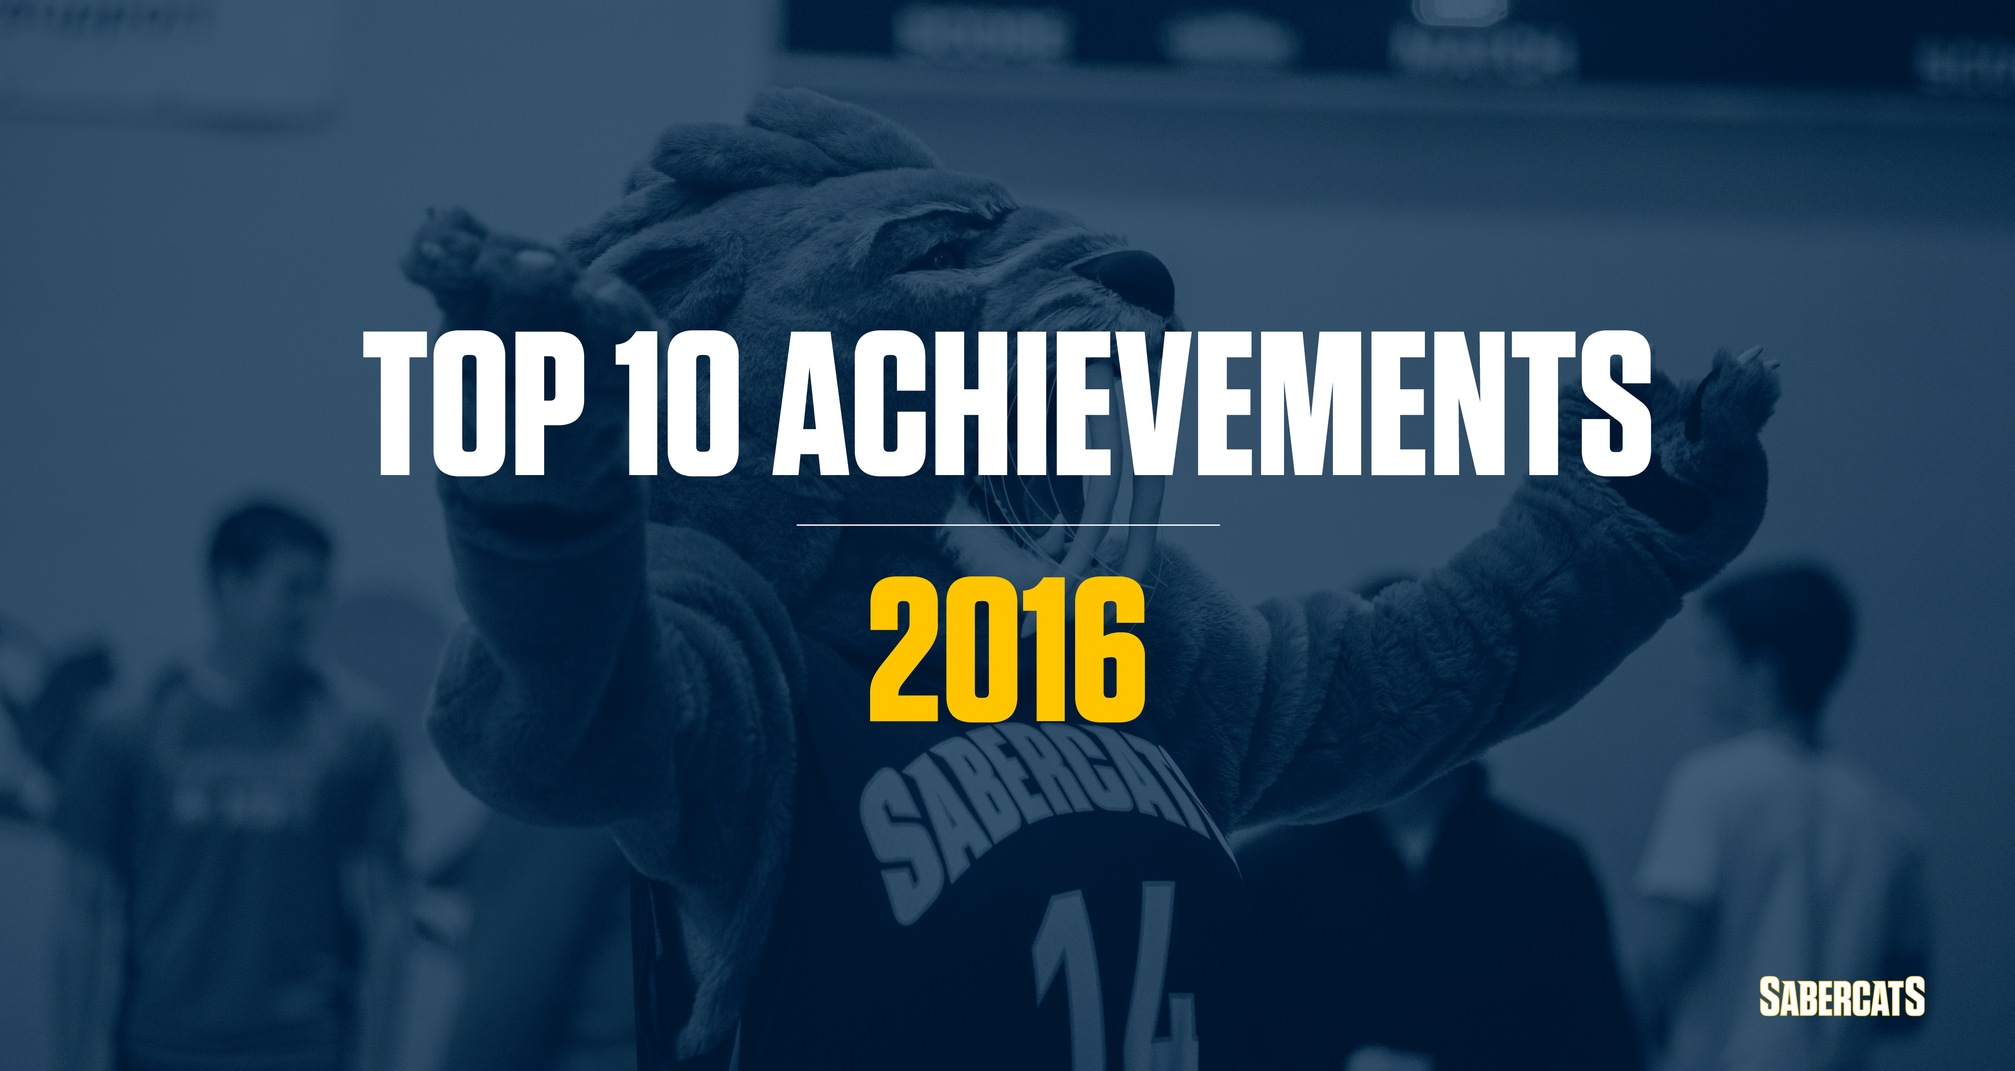 Top 10 Achievements of the 2016 Calendar Year